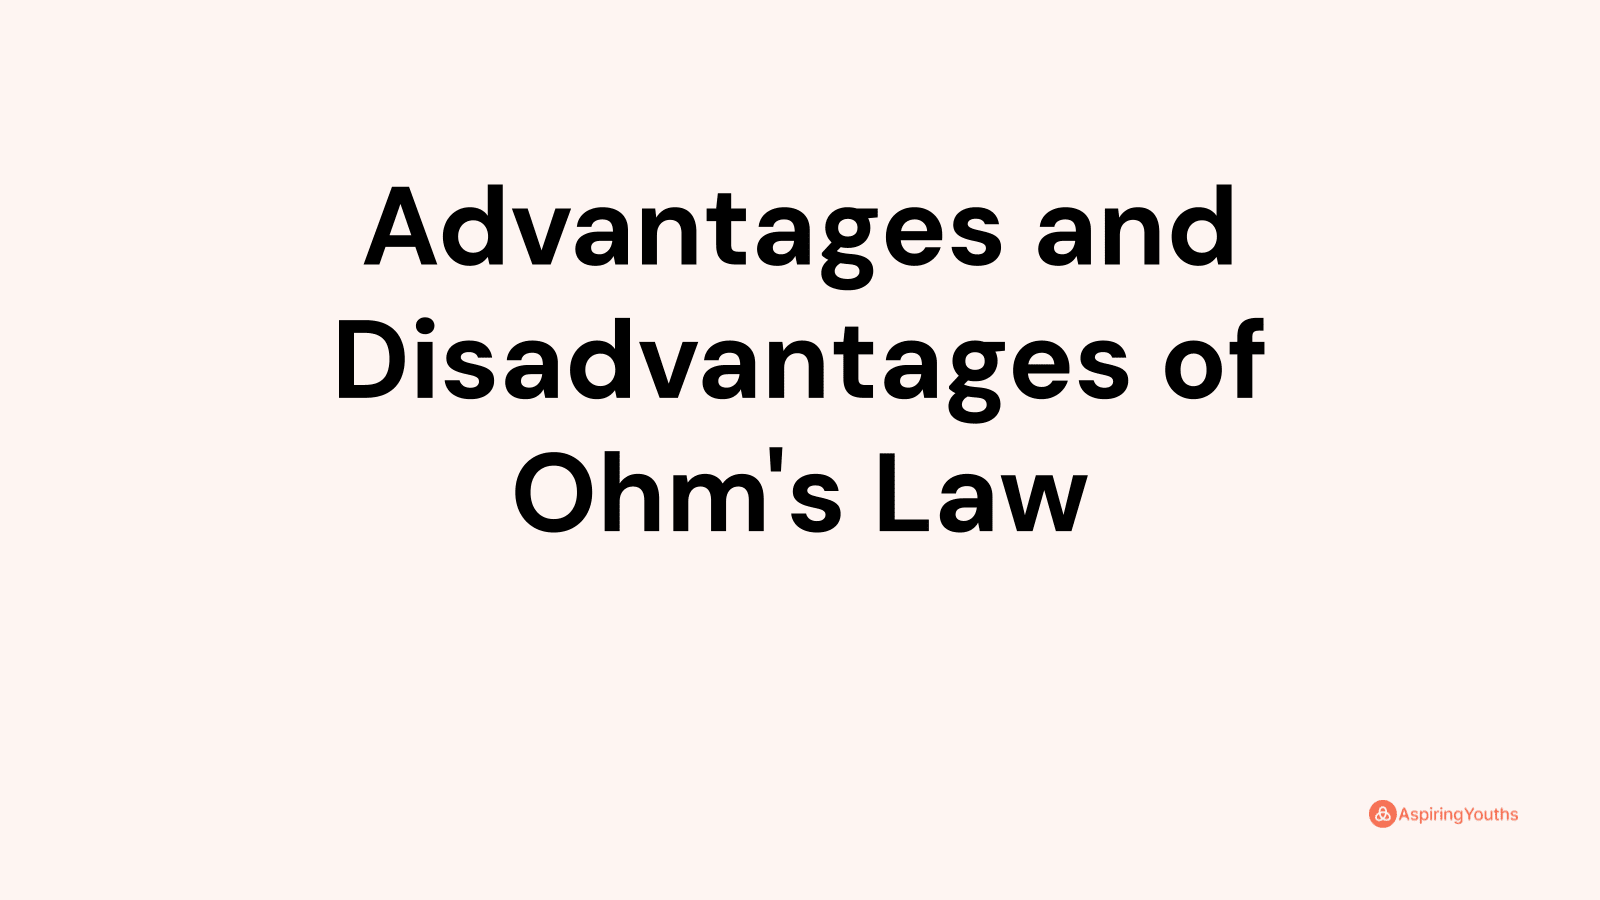 Advantages and disadvantages of Ohm's Law